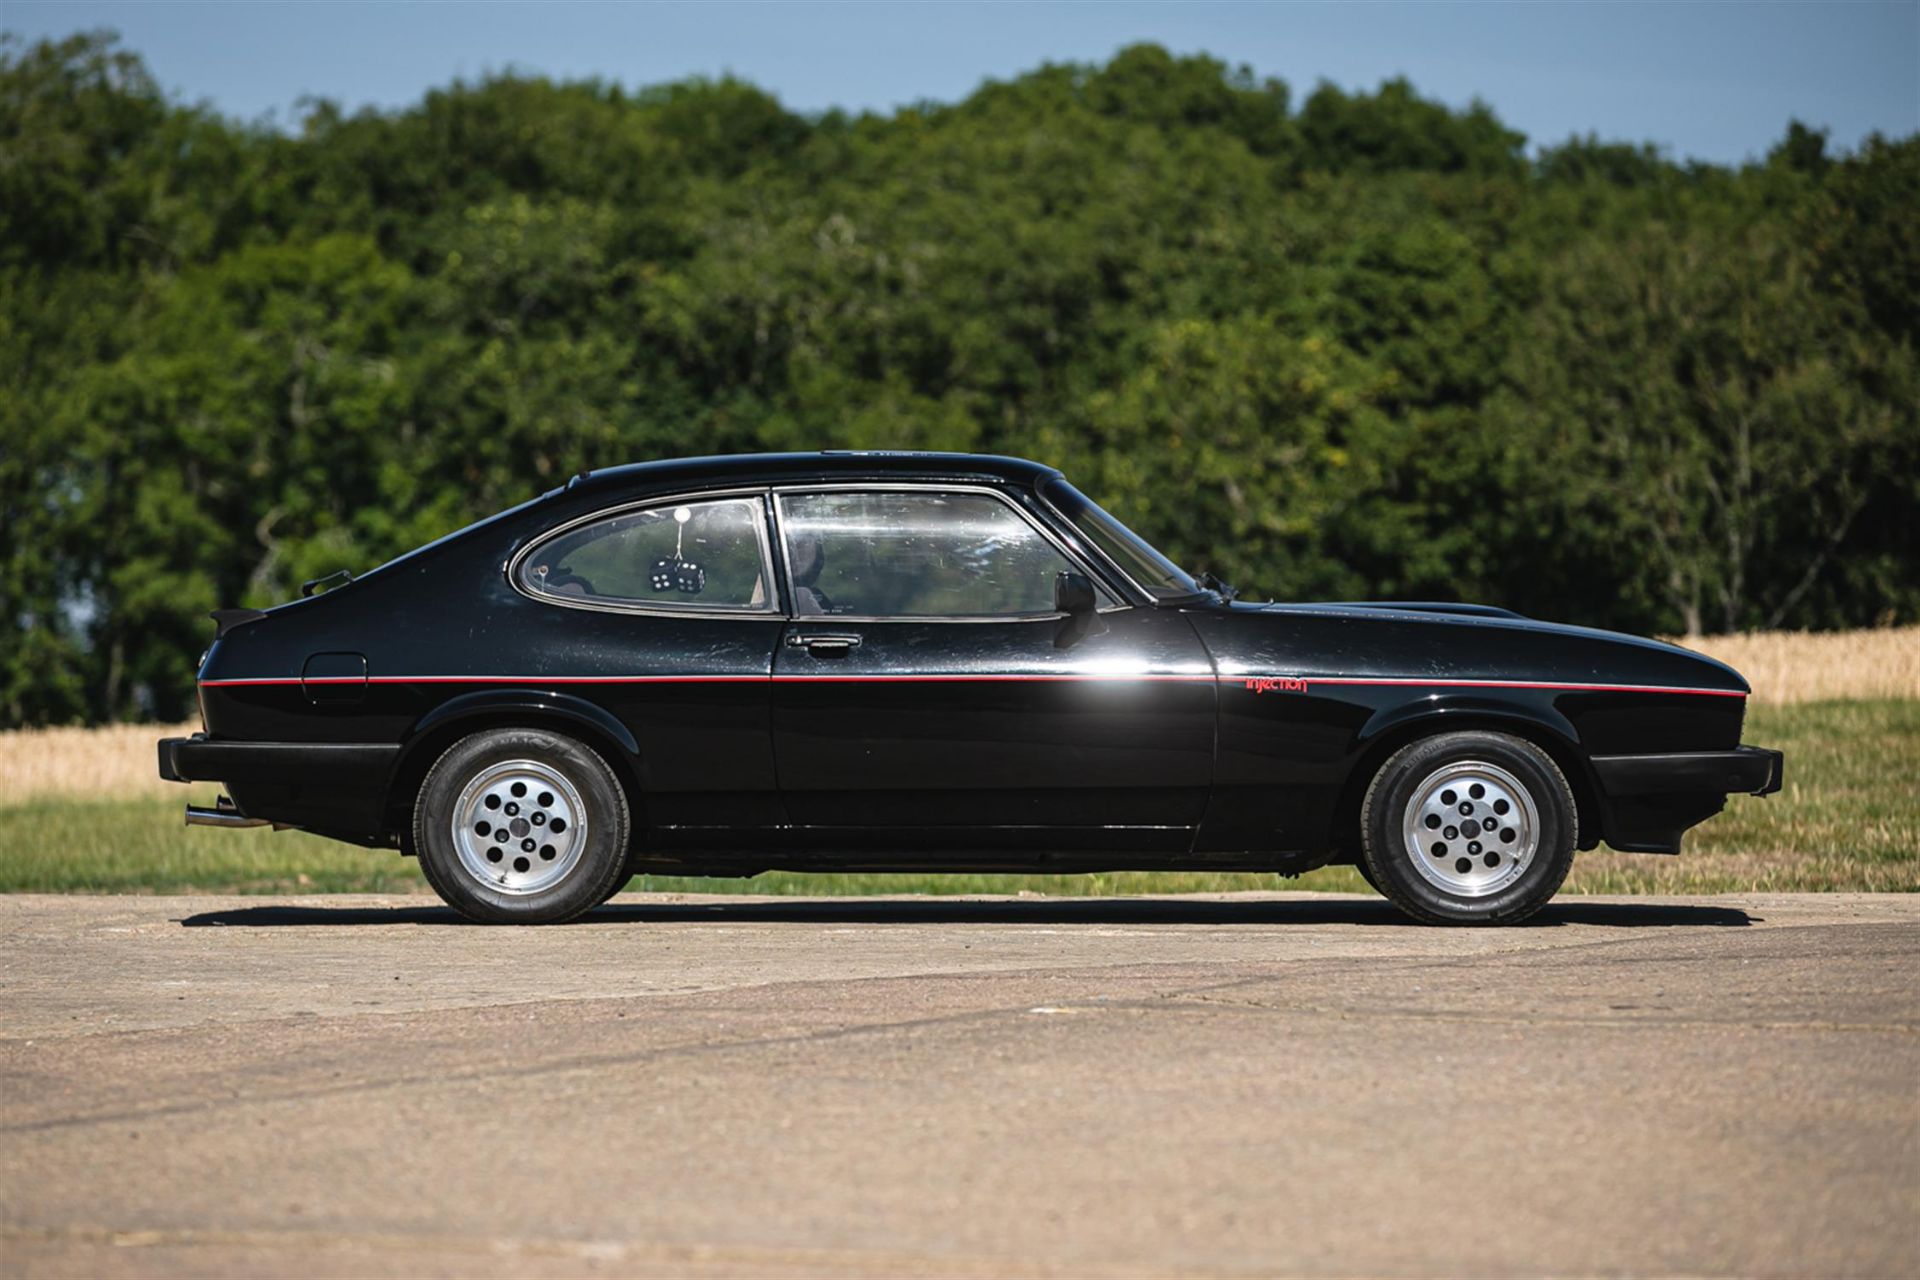 1982 Ford Capri 2.8-Litre injection (Ex-Alfie Moon, BBC EastEnders) - Image 5 of 10